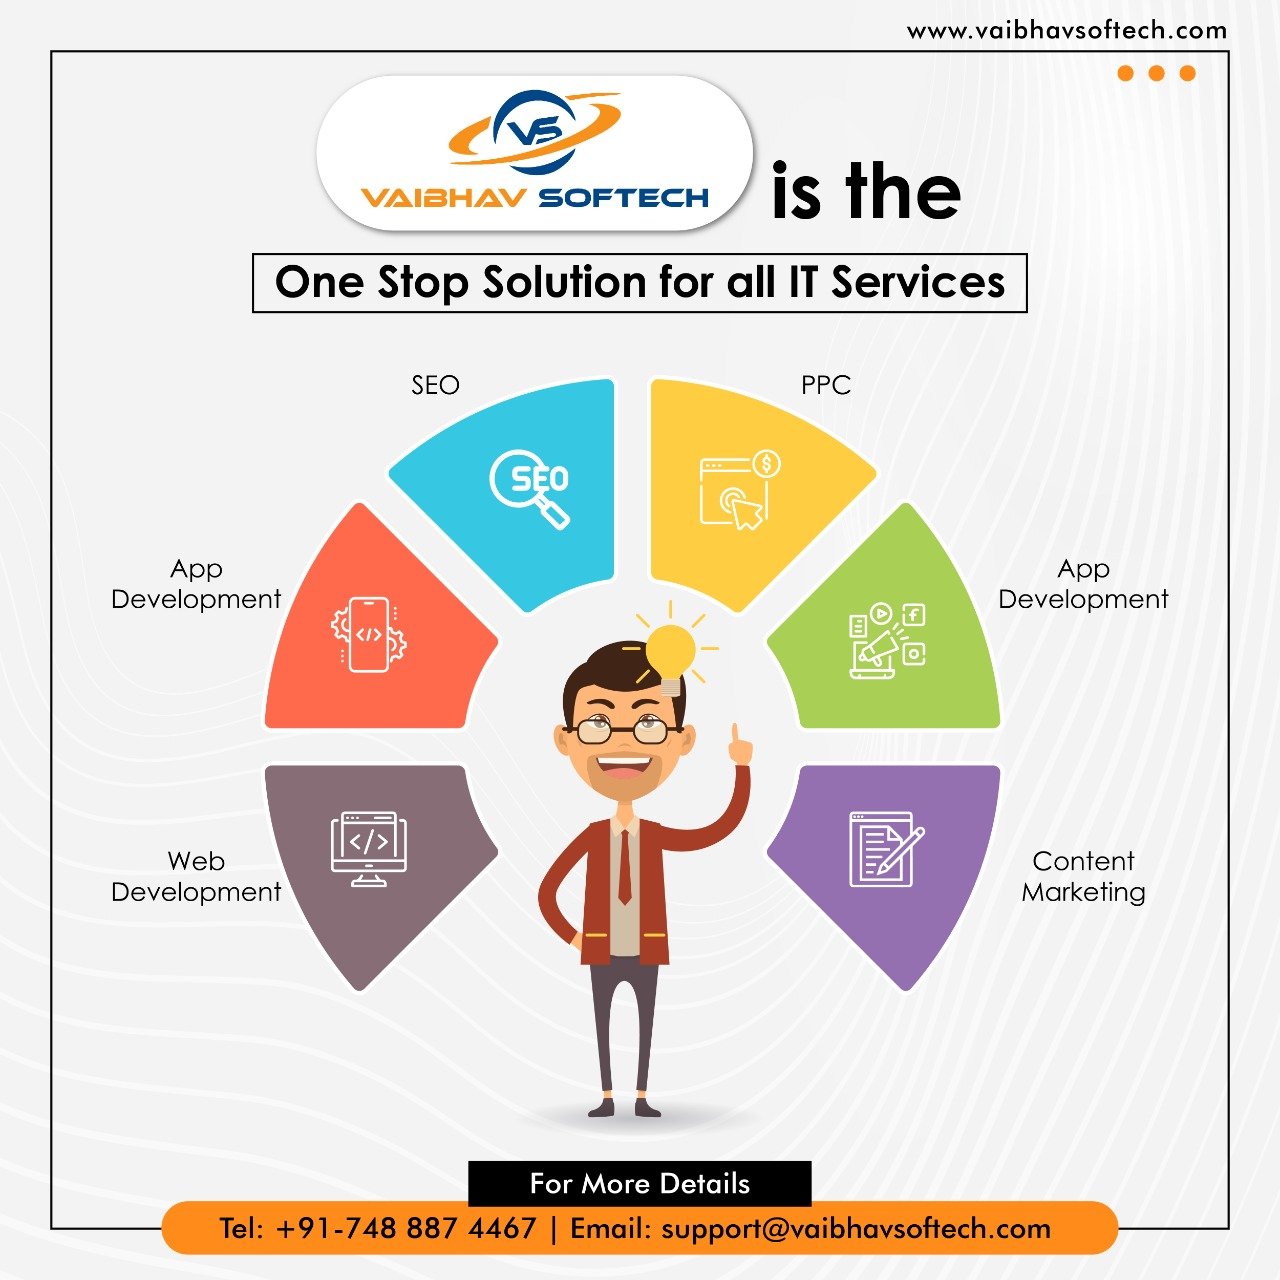 𝐃𝐢𝐠𝐢𝐭𝐚𝐥 𝐌𝐚𝐫𝐤𝐞𝐭𝐢𝐧𝐠 VAIBHAV SOFTECH IS THE ONE STOP SOLUTION FOR ALL IT SERVICES